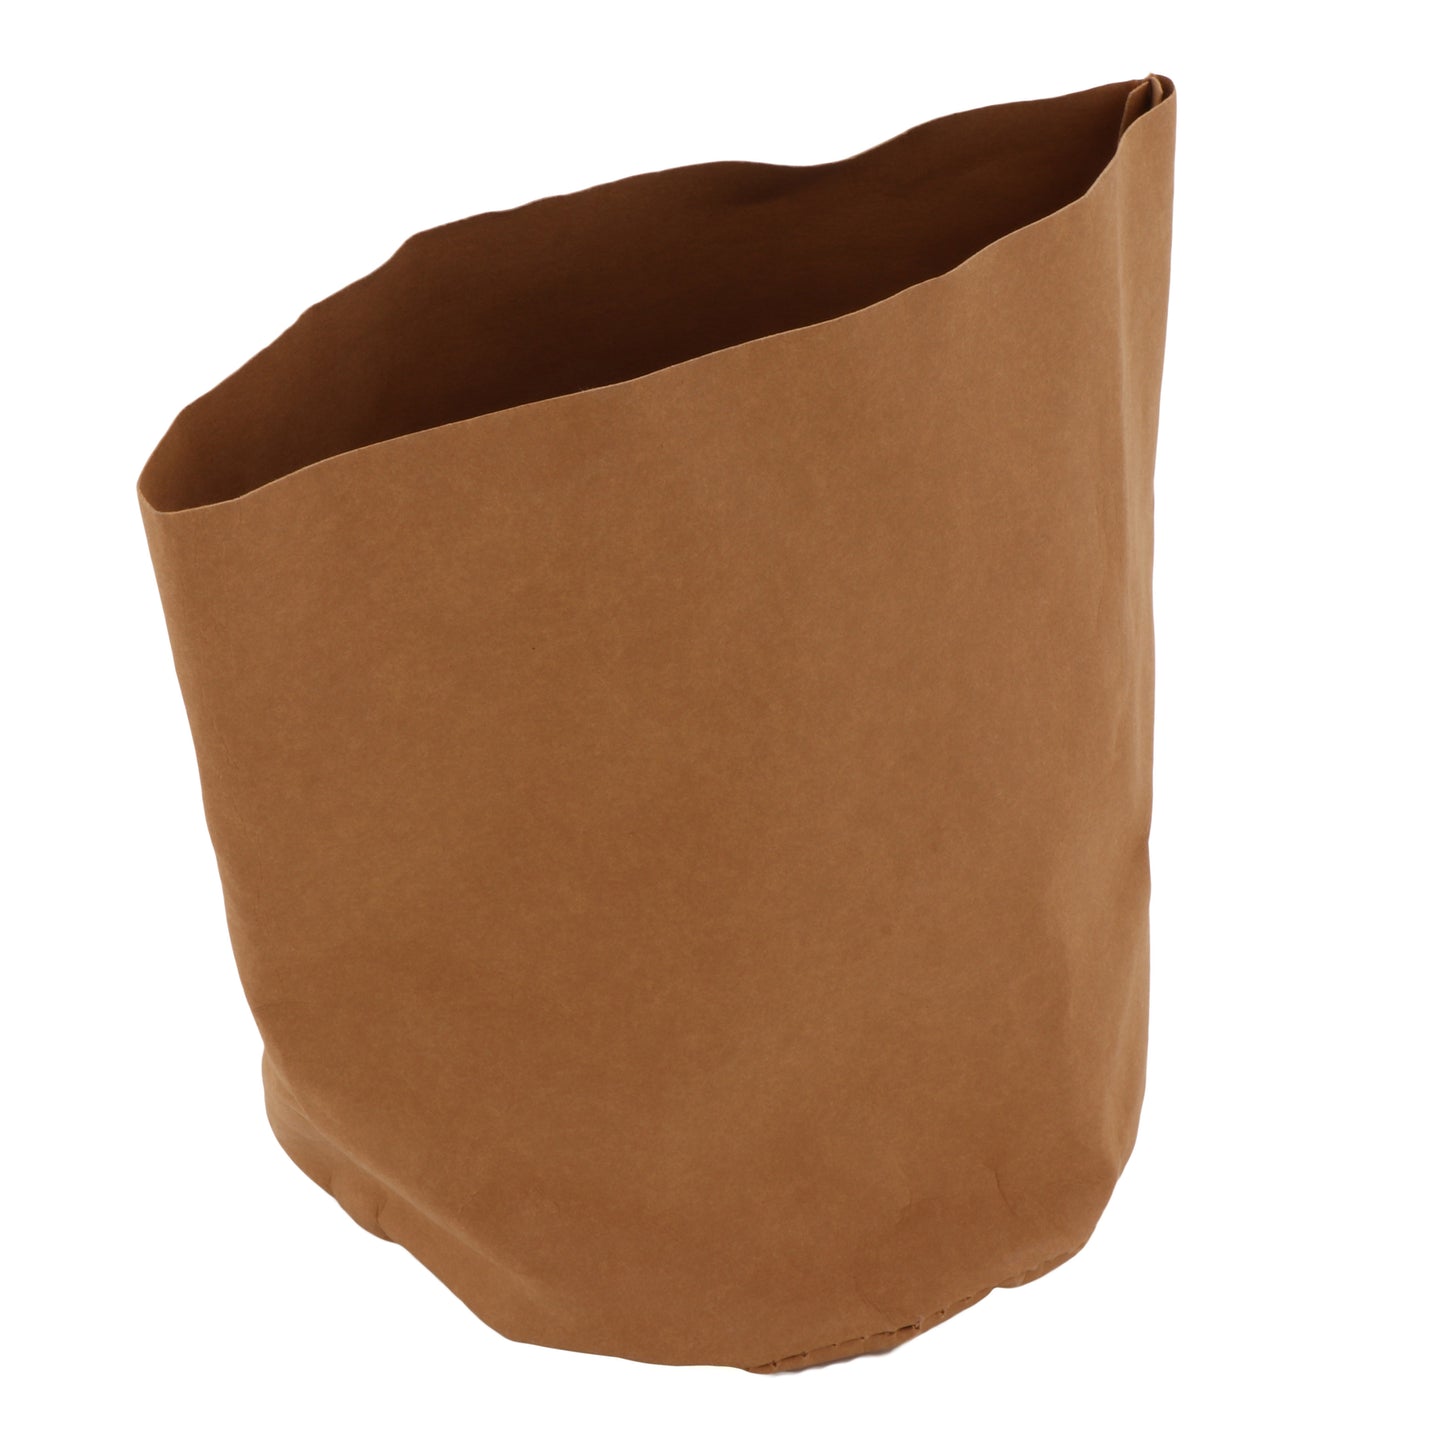 4.75" Dia. Washable & Reusable Paper Bag / Bread Basket, 5.5" tall unrolled, set of 2